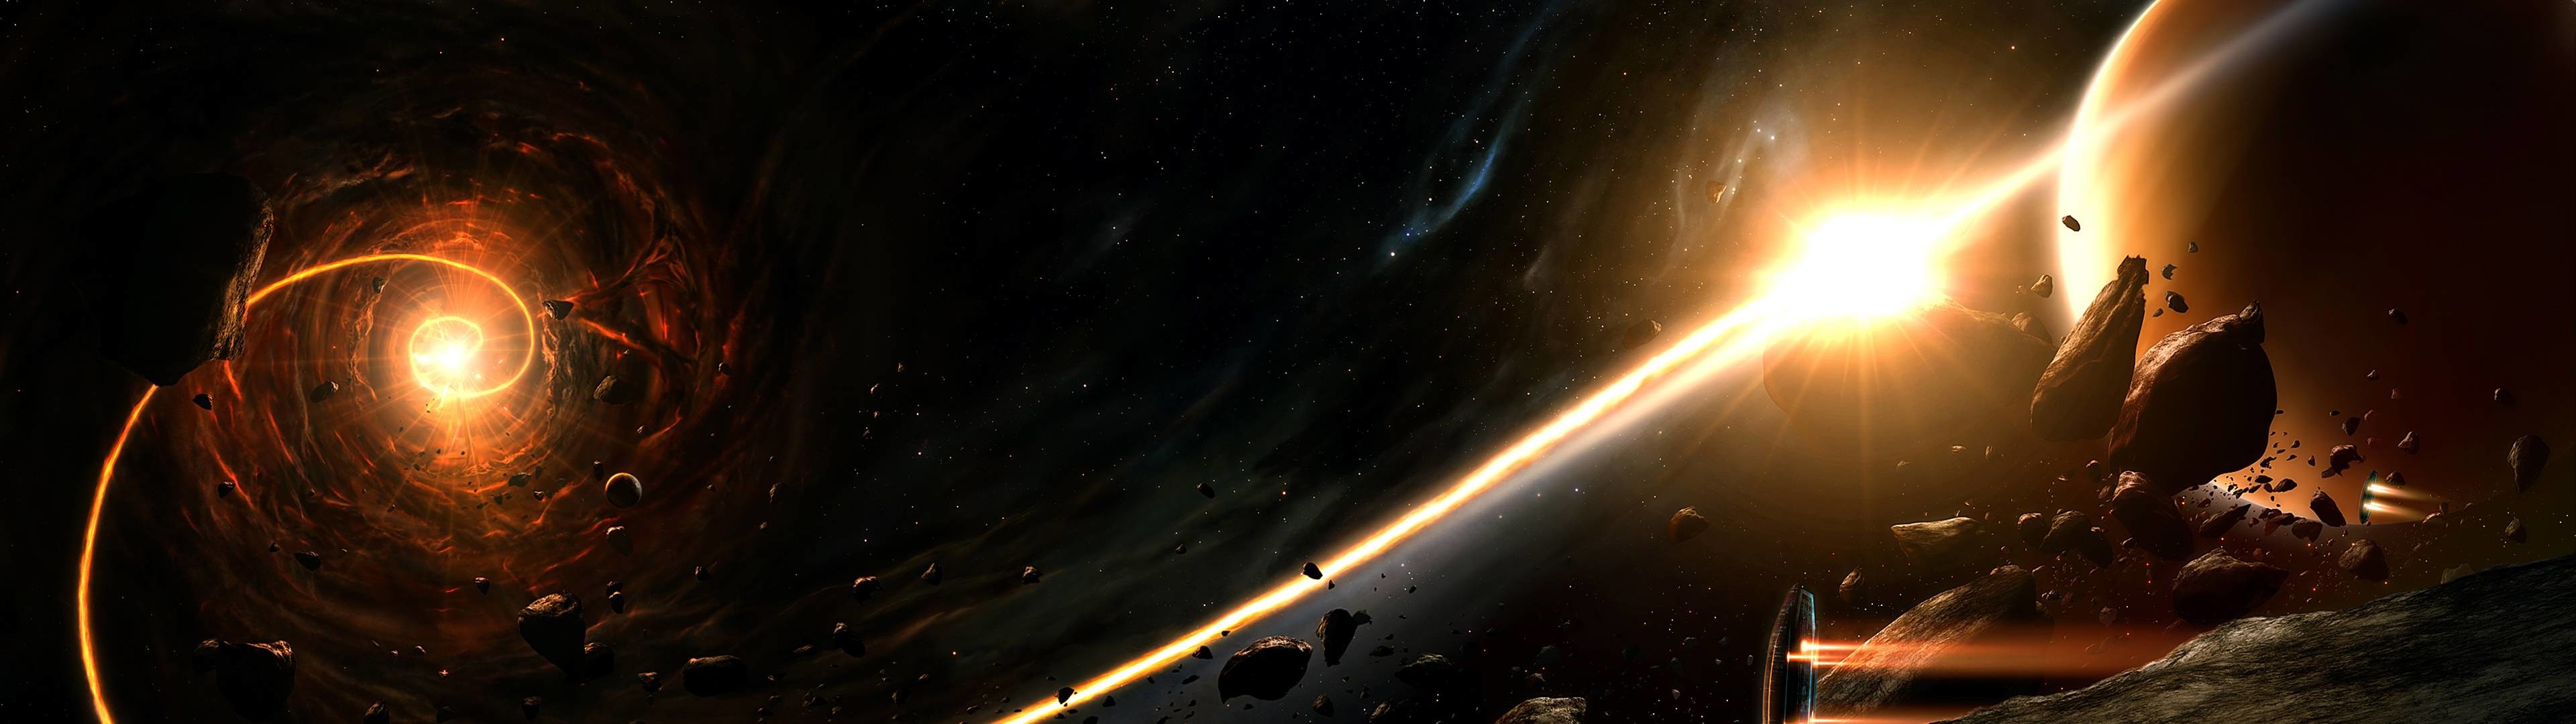 3840x1080 My updated dual monitor wallpaper collection - mostly space themed